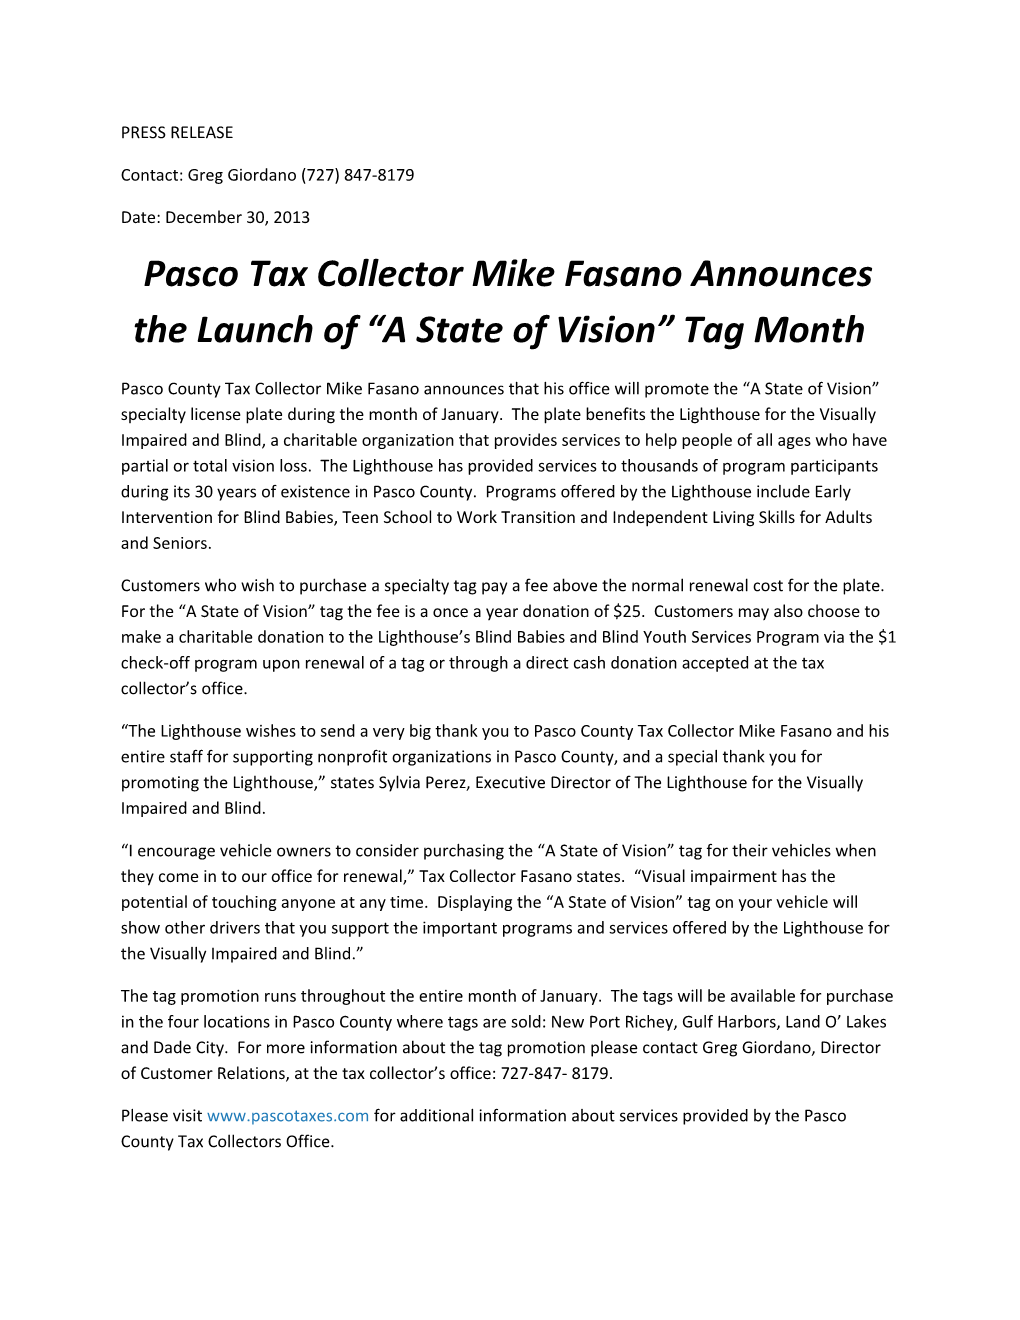 Pasco Tax Collector Mike Fasano Announces the Launch of a State of Vision Tag Month